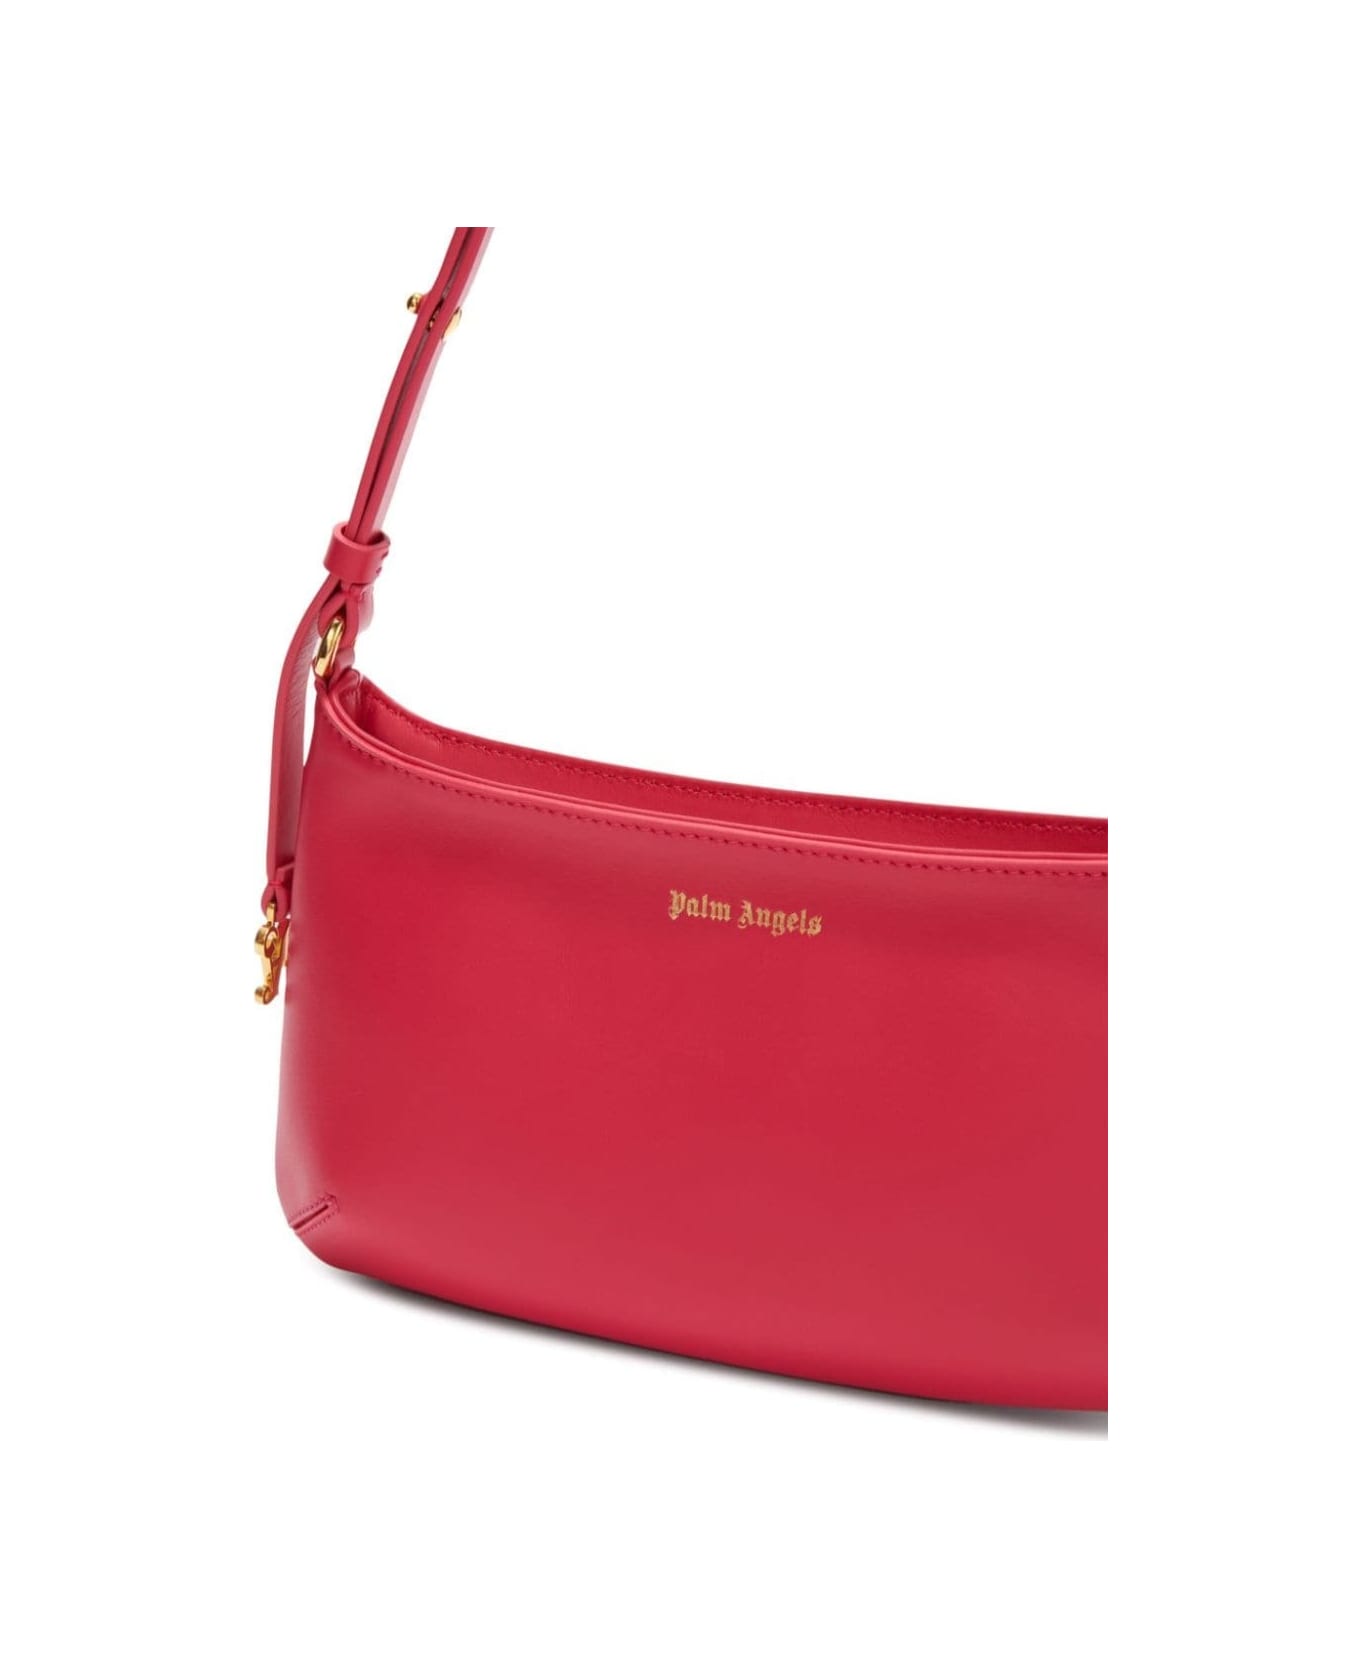 Palm Angels Lategram Bag Love Potion Gold - Red トートバッグ